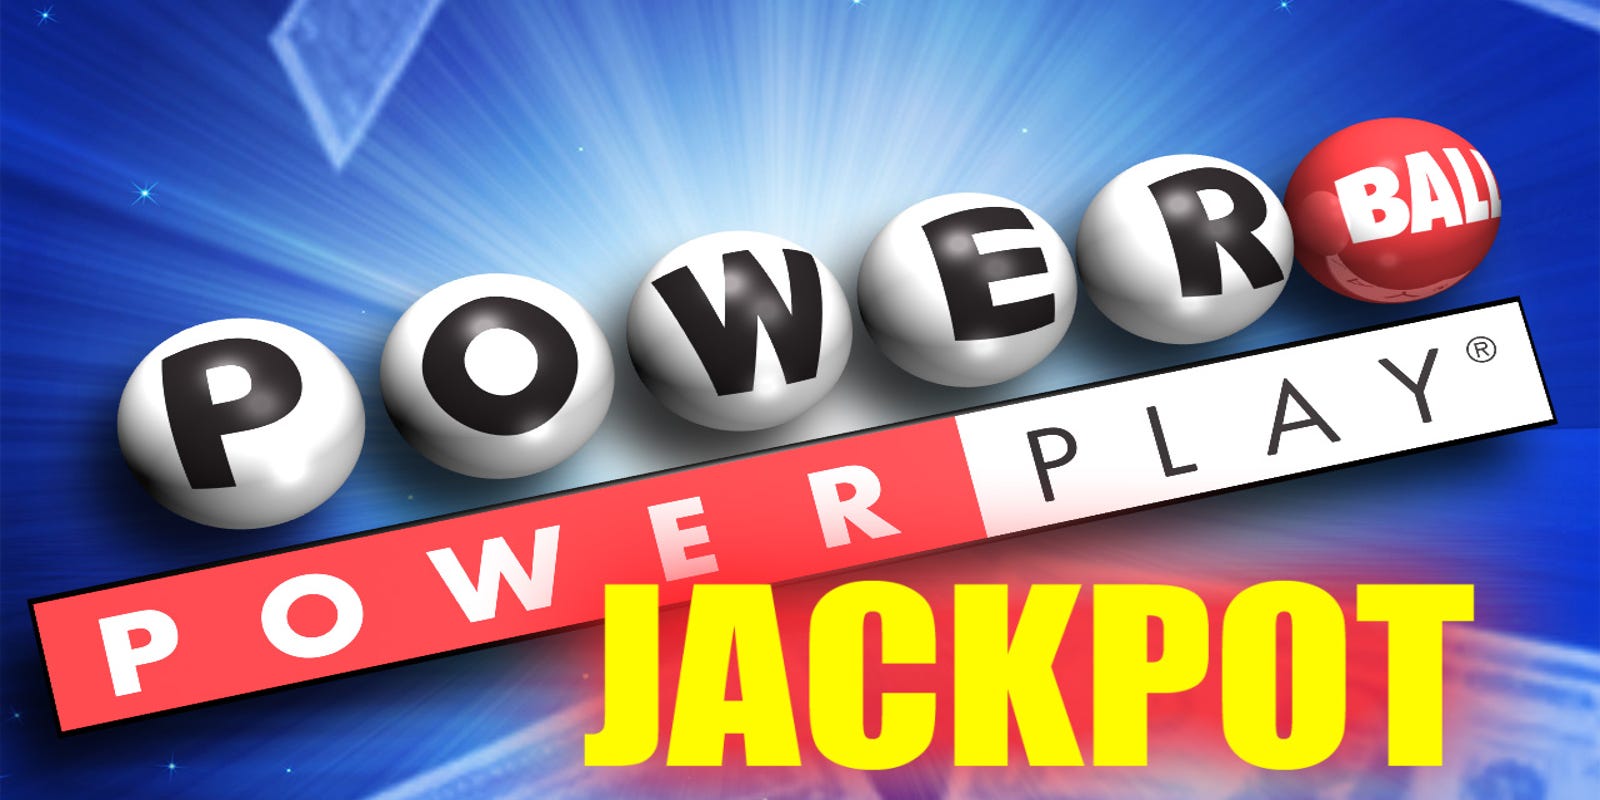 Powerball numbers for Saturday night